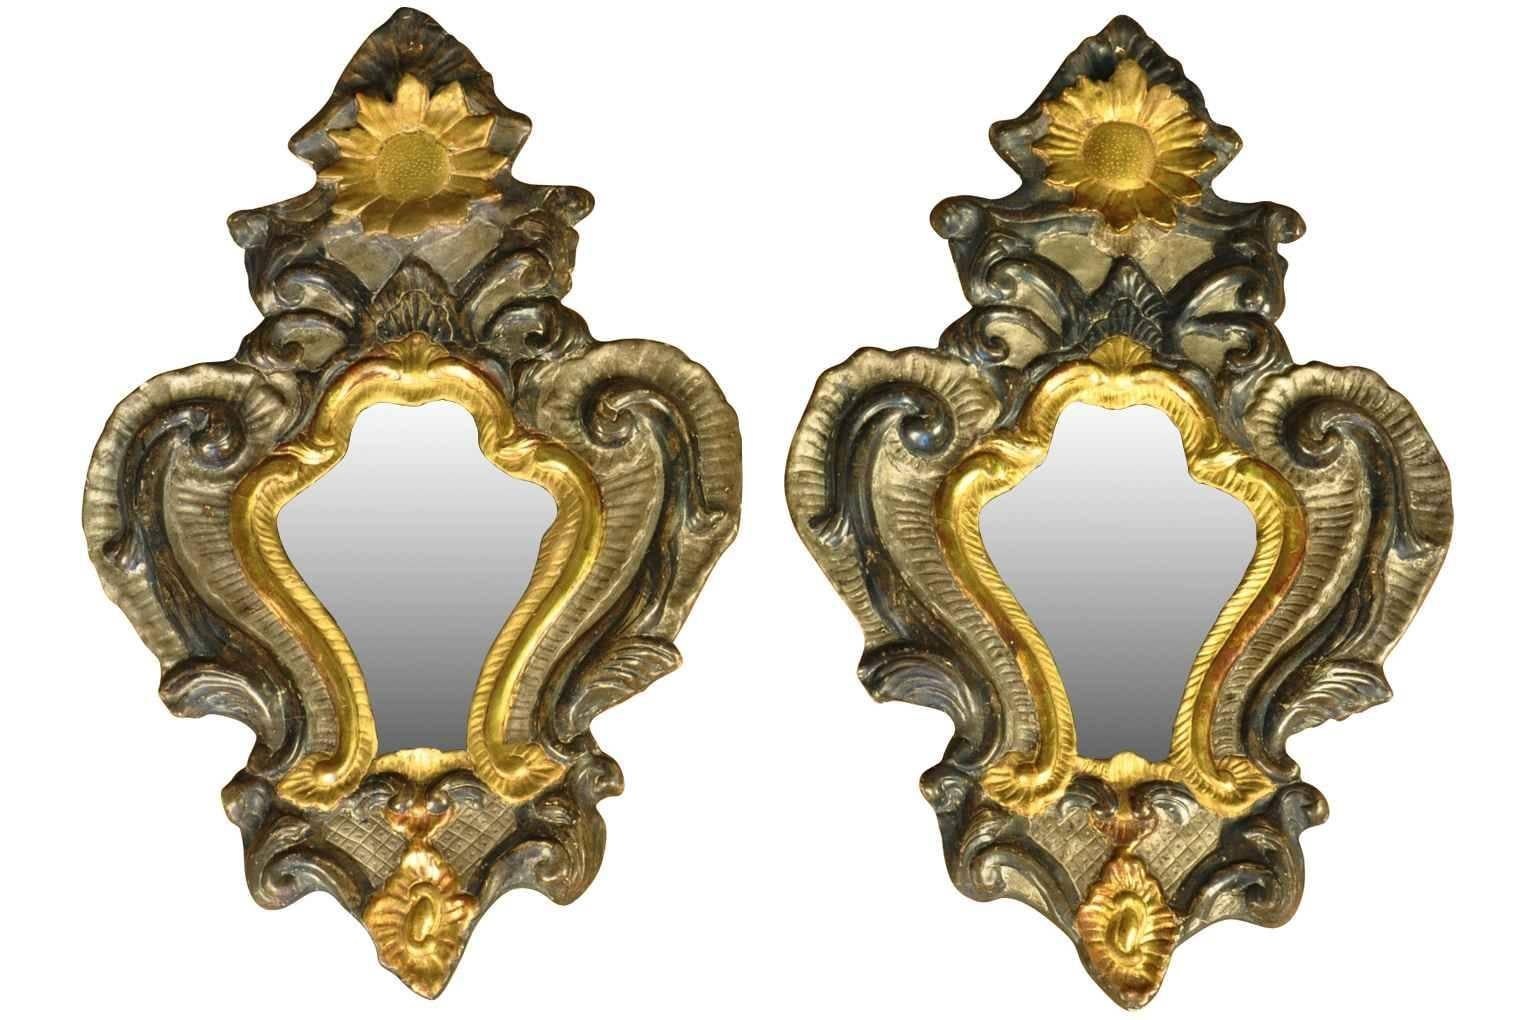 A striking pair of 18th century Venetian mirrors constructed from polychromed and gilt papier mâché and wood. Please note that this pair has been drilled towards the base to convert into sconces. There is a pair available.